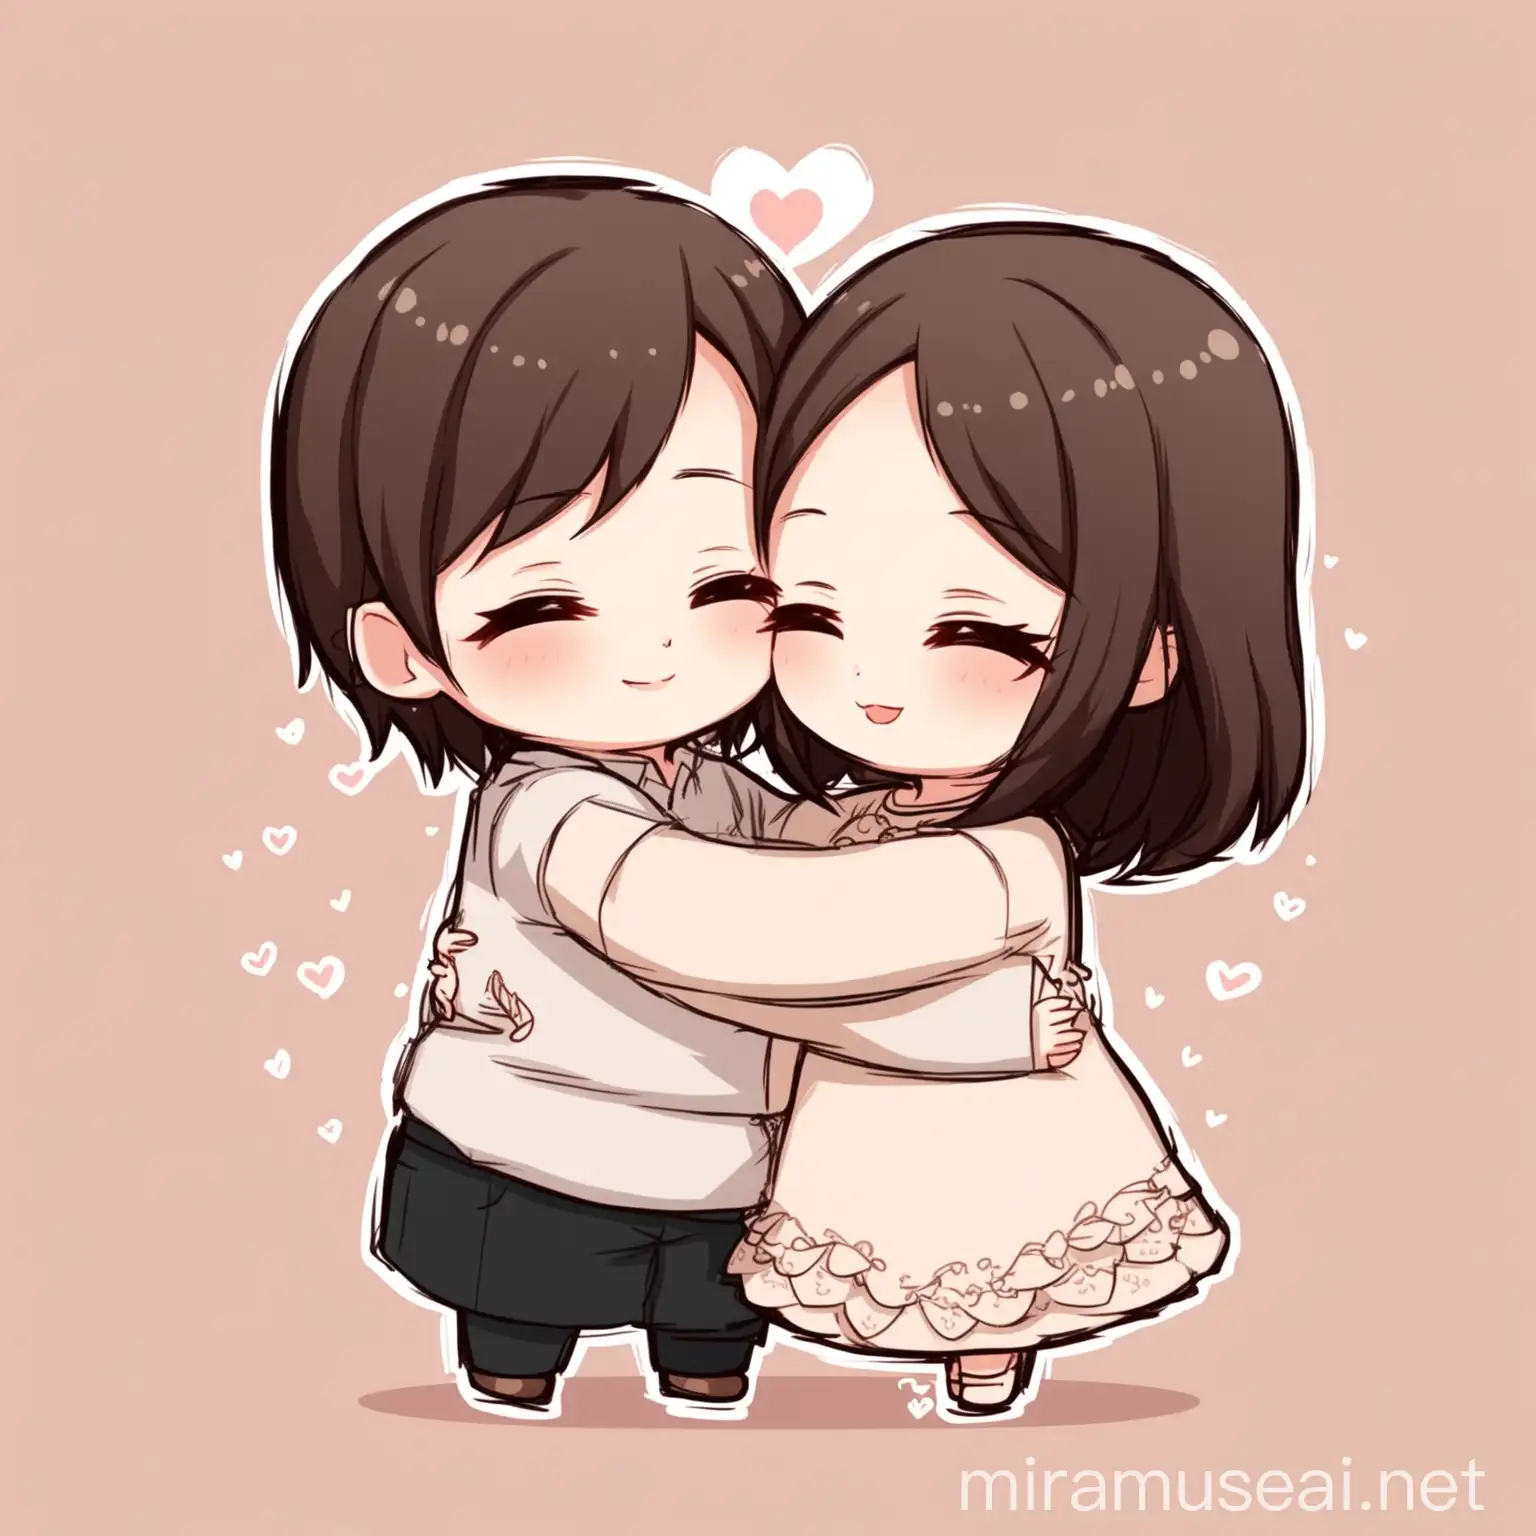 Make them look like inlove hug and kiss each other Make a chibi full body "cute animated version" of the image,